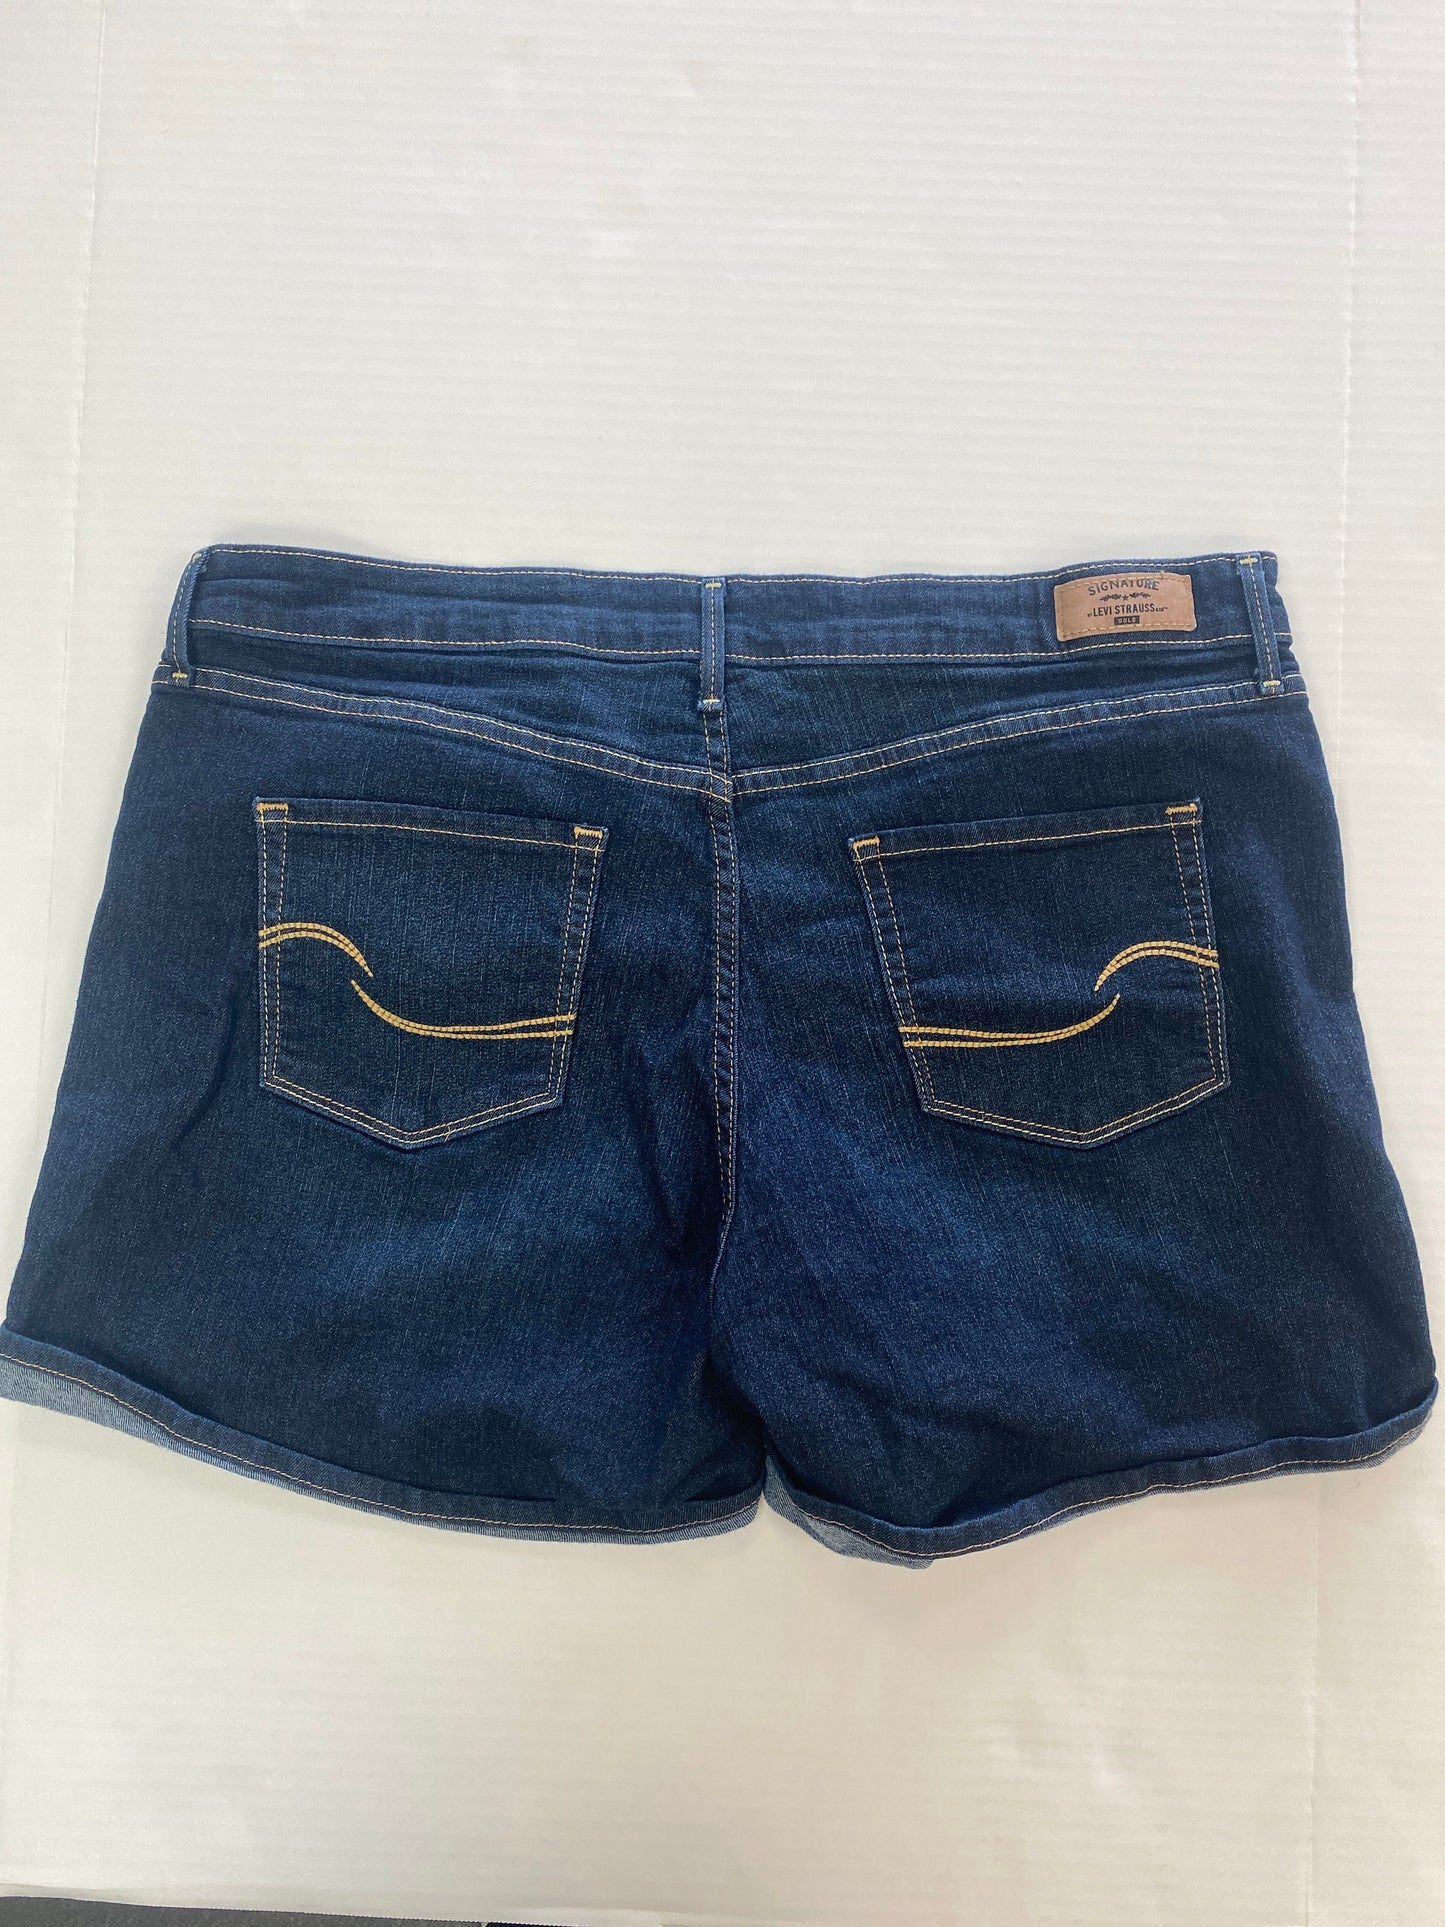 Shorts By Levis  Size: 20w